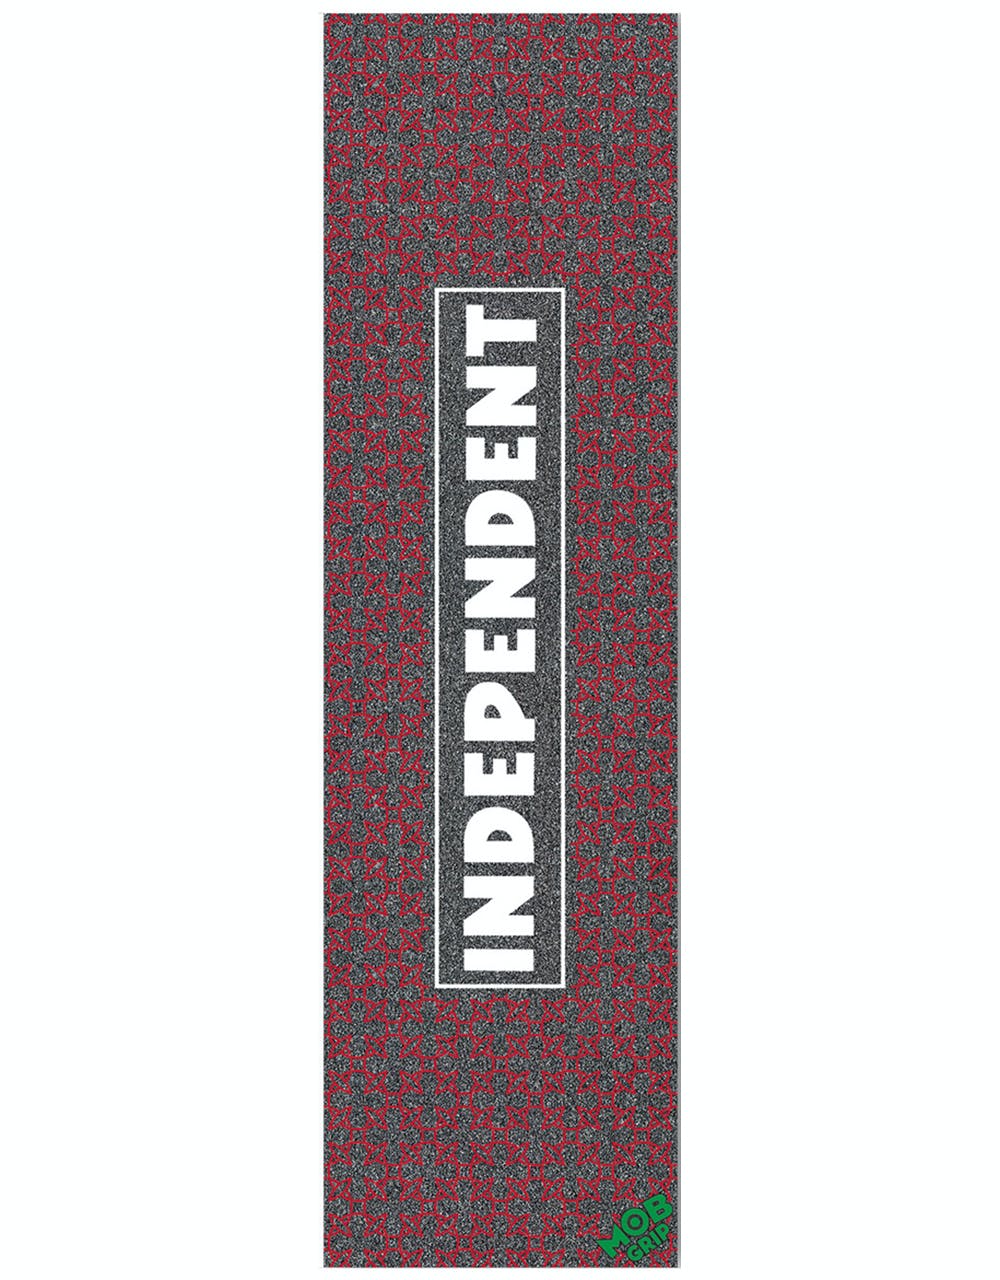 MOB x Independent Repeat Cross 9" Grip Tape Sheet